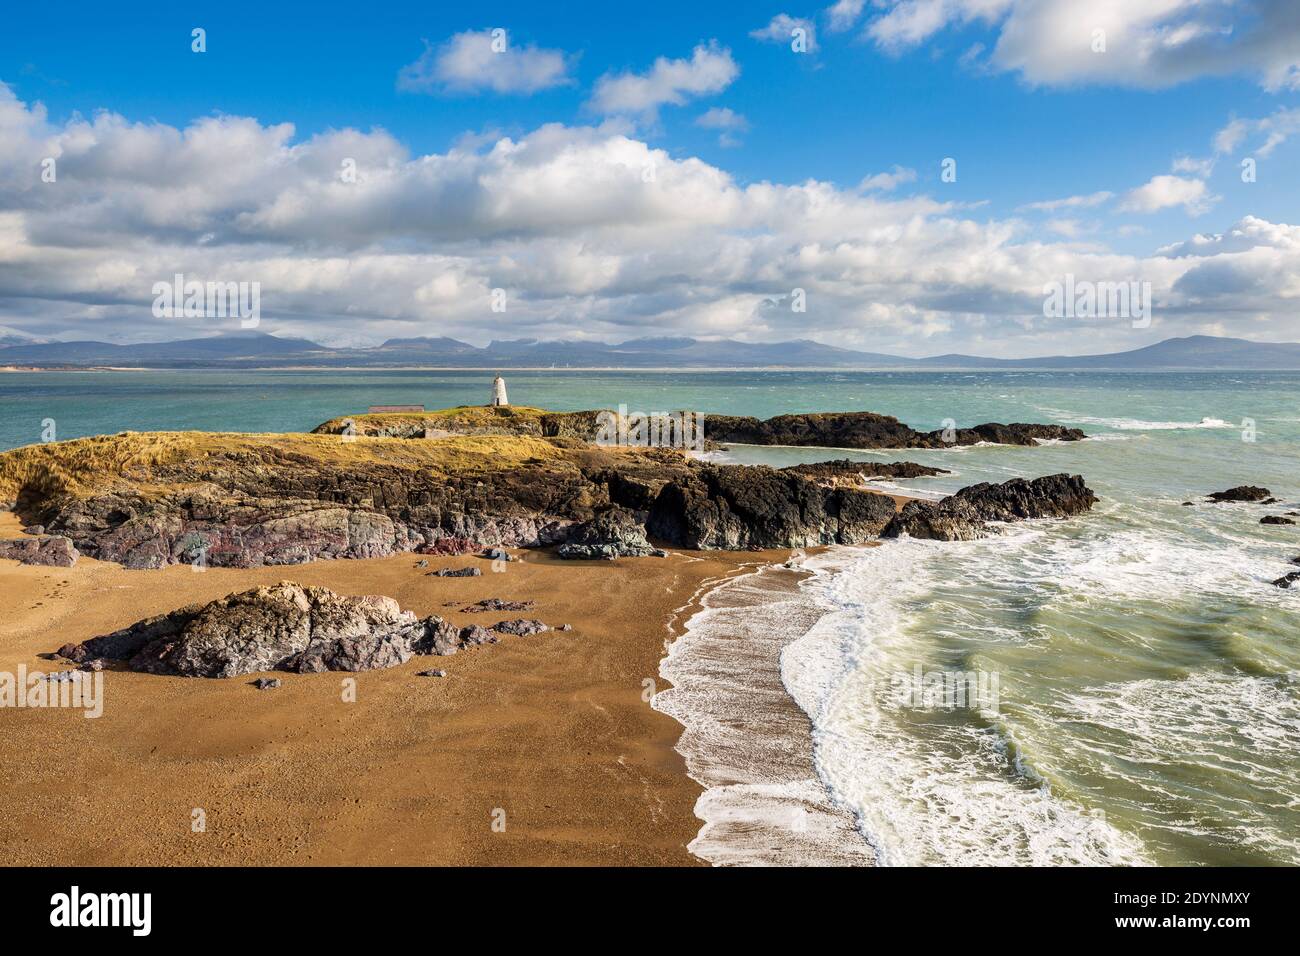 A view of Twr Bach and the snow capped Snowdonia mountains across Porth Twr Mawr on Llanddwyn island, Anglesey Stock Photo